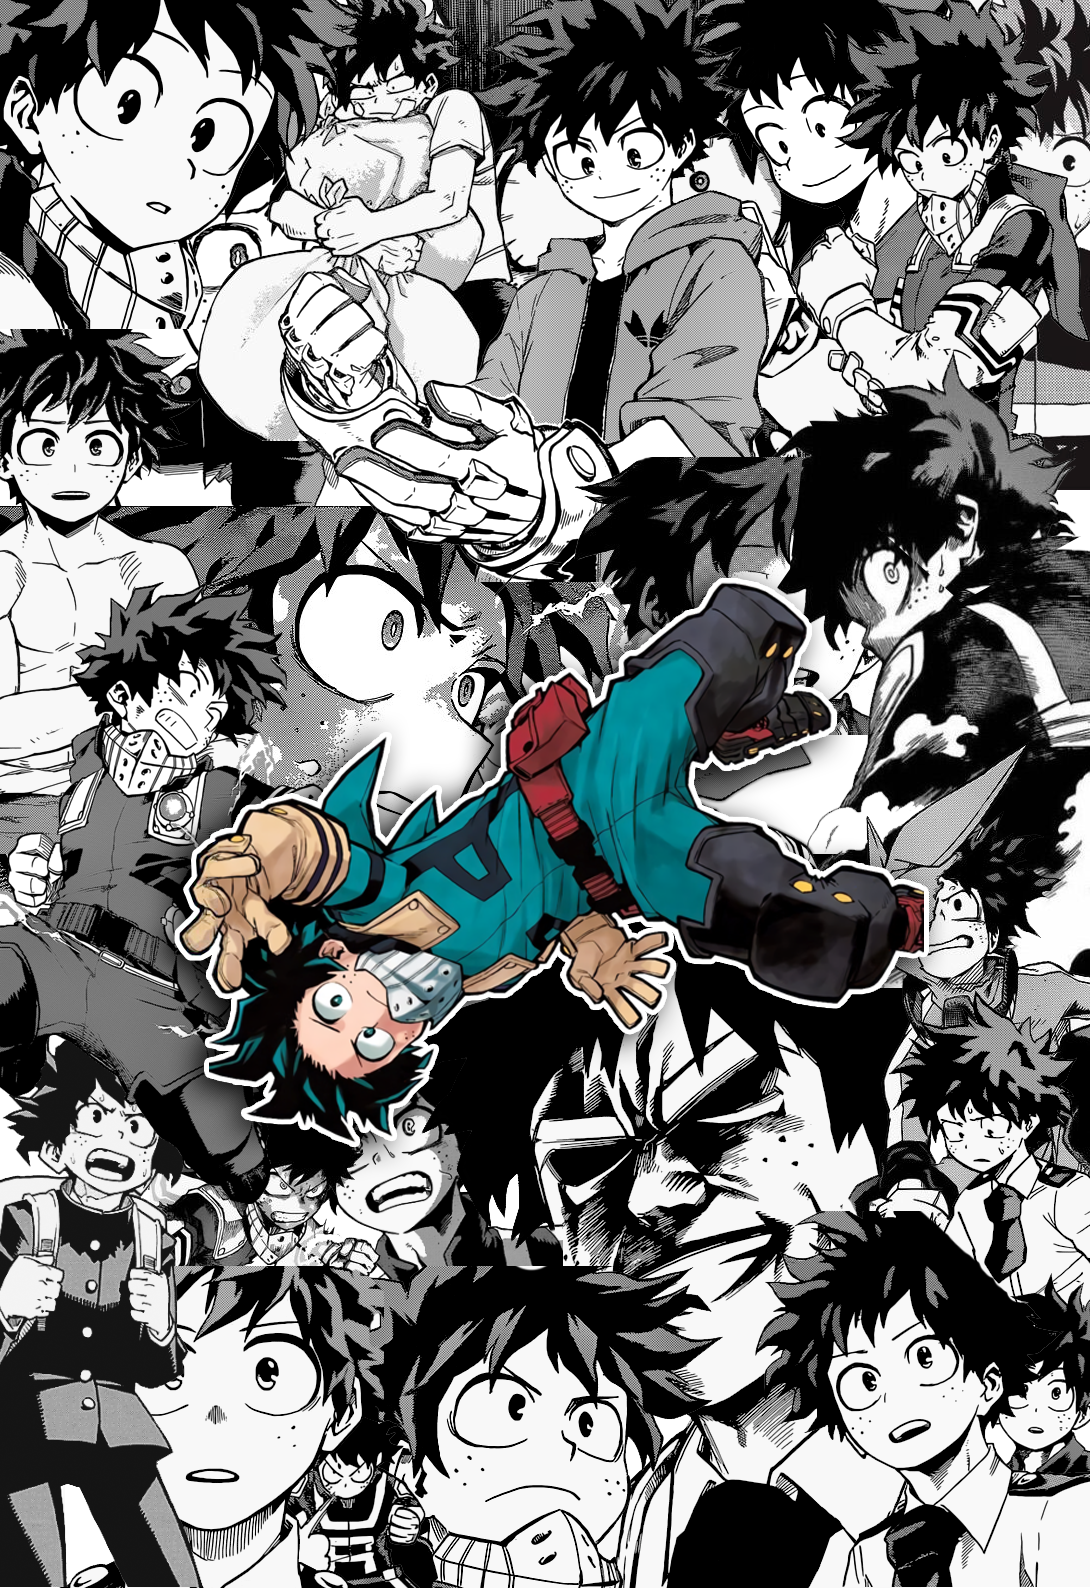 Finally i decided to take the courage to post an old Deku wallpaper that I did some time ago. Enjoy it.: BokuNoHeroAcademia